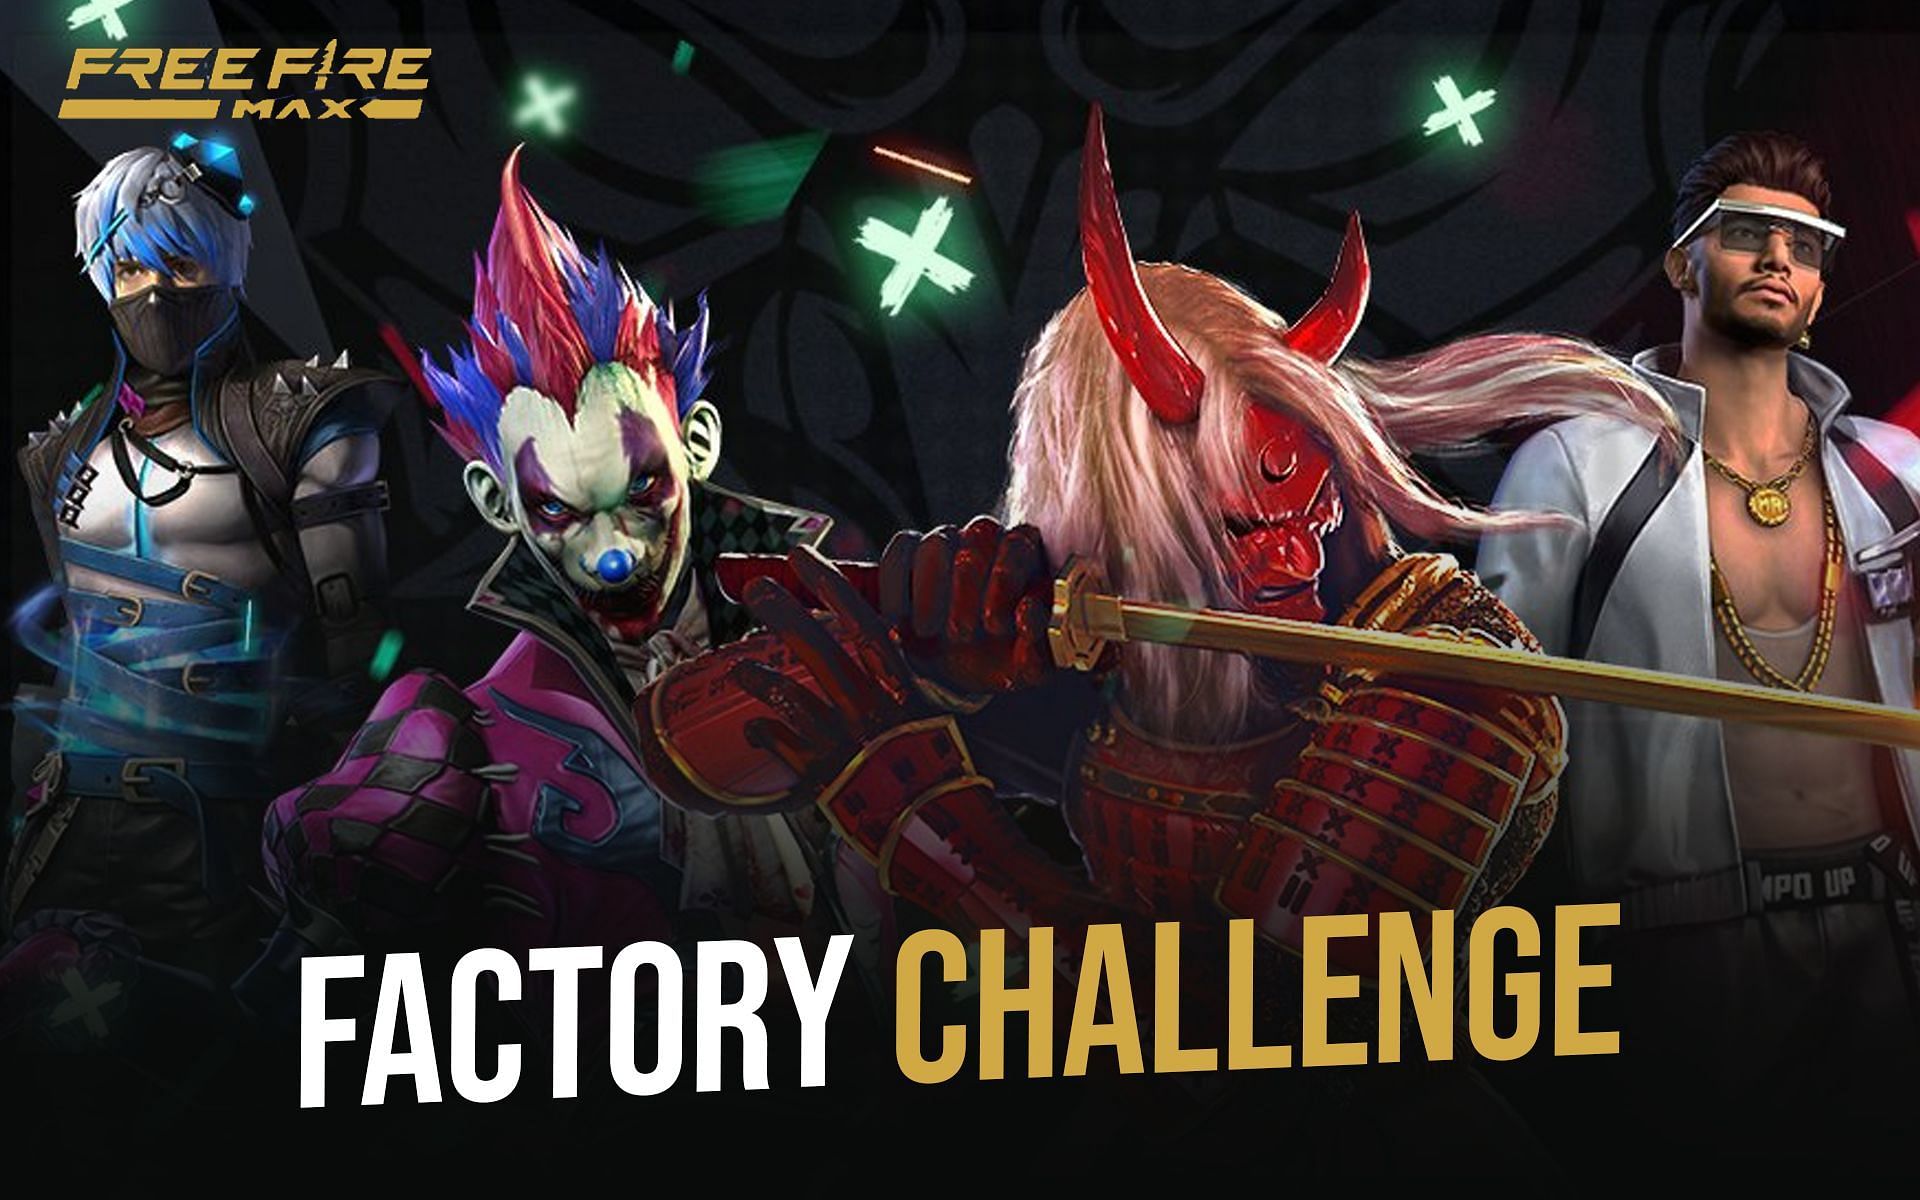 The Factory Challenge is enjoyed by lots of users (Image via Sportskeeda)